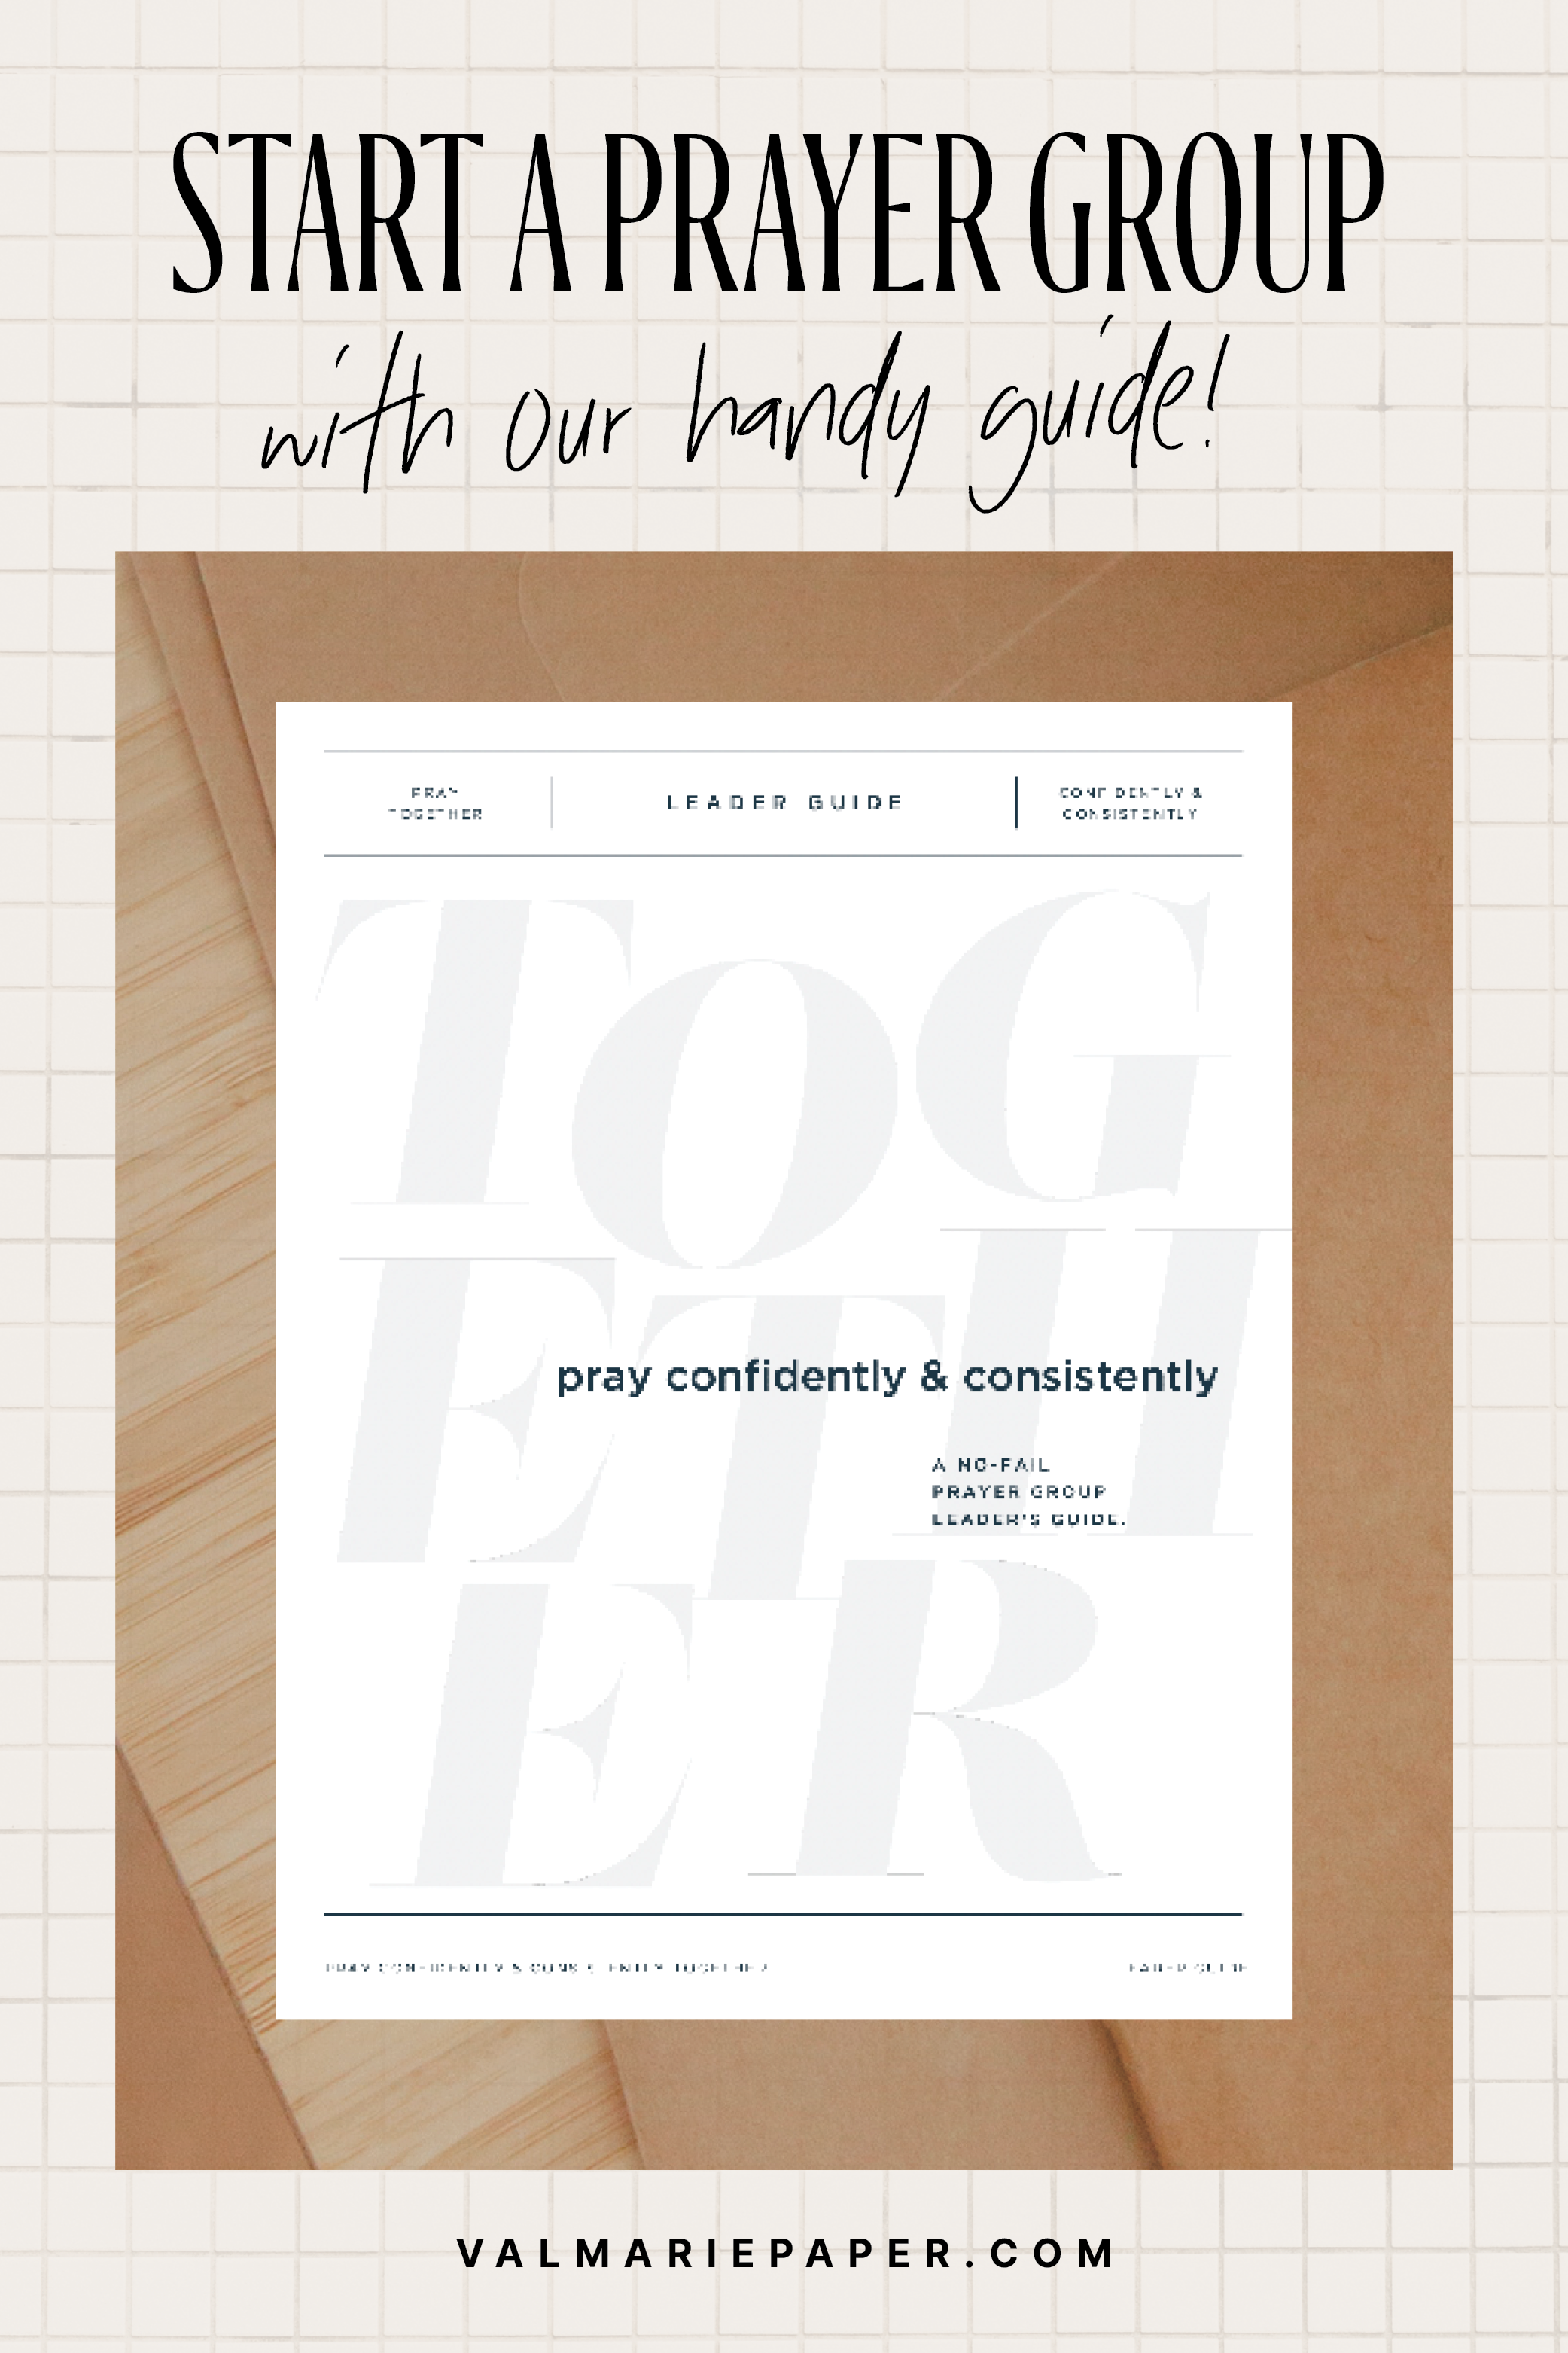 How to pray with others by Valerie Woerner, prayer journal, women's ministry, prayer, meditation, how to make a prayer journal, prayer warrior, war room, Bible study, tools, prayer notebook, how to pray, gather, community